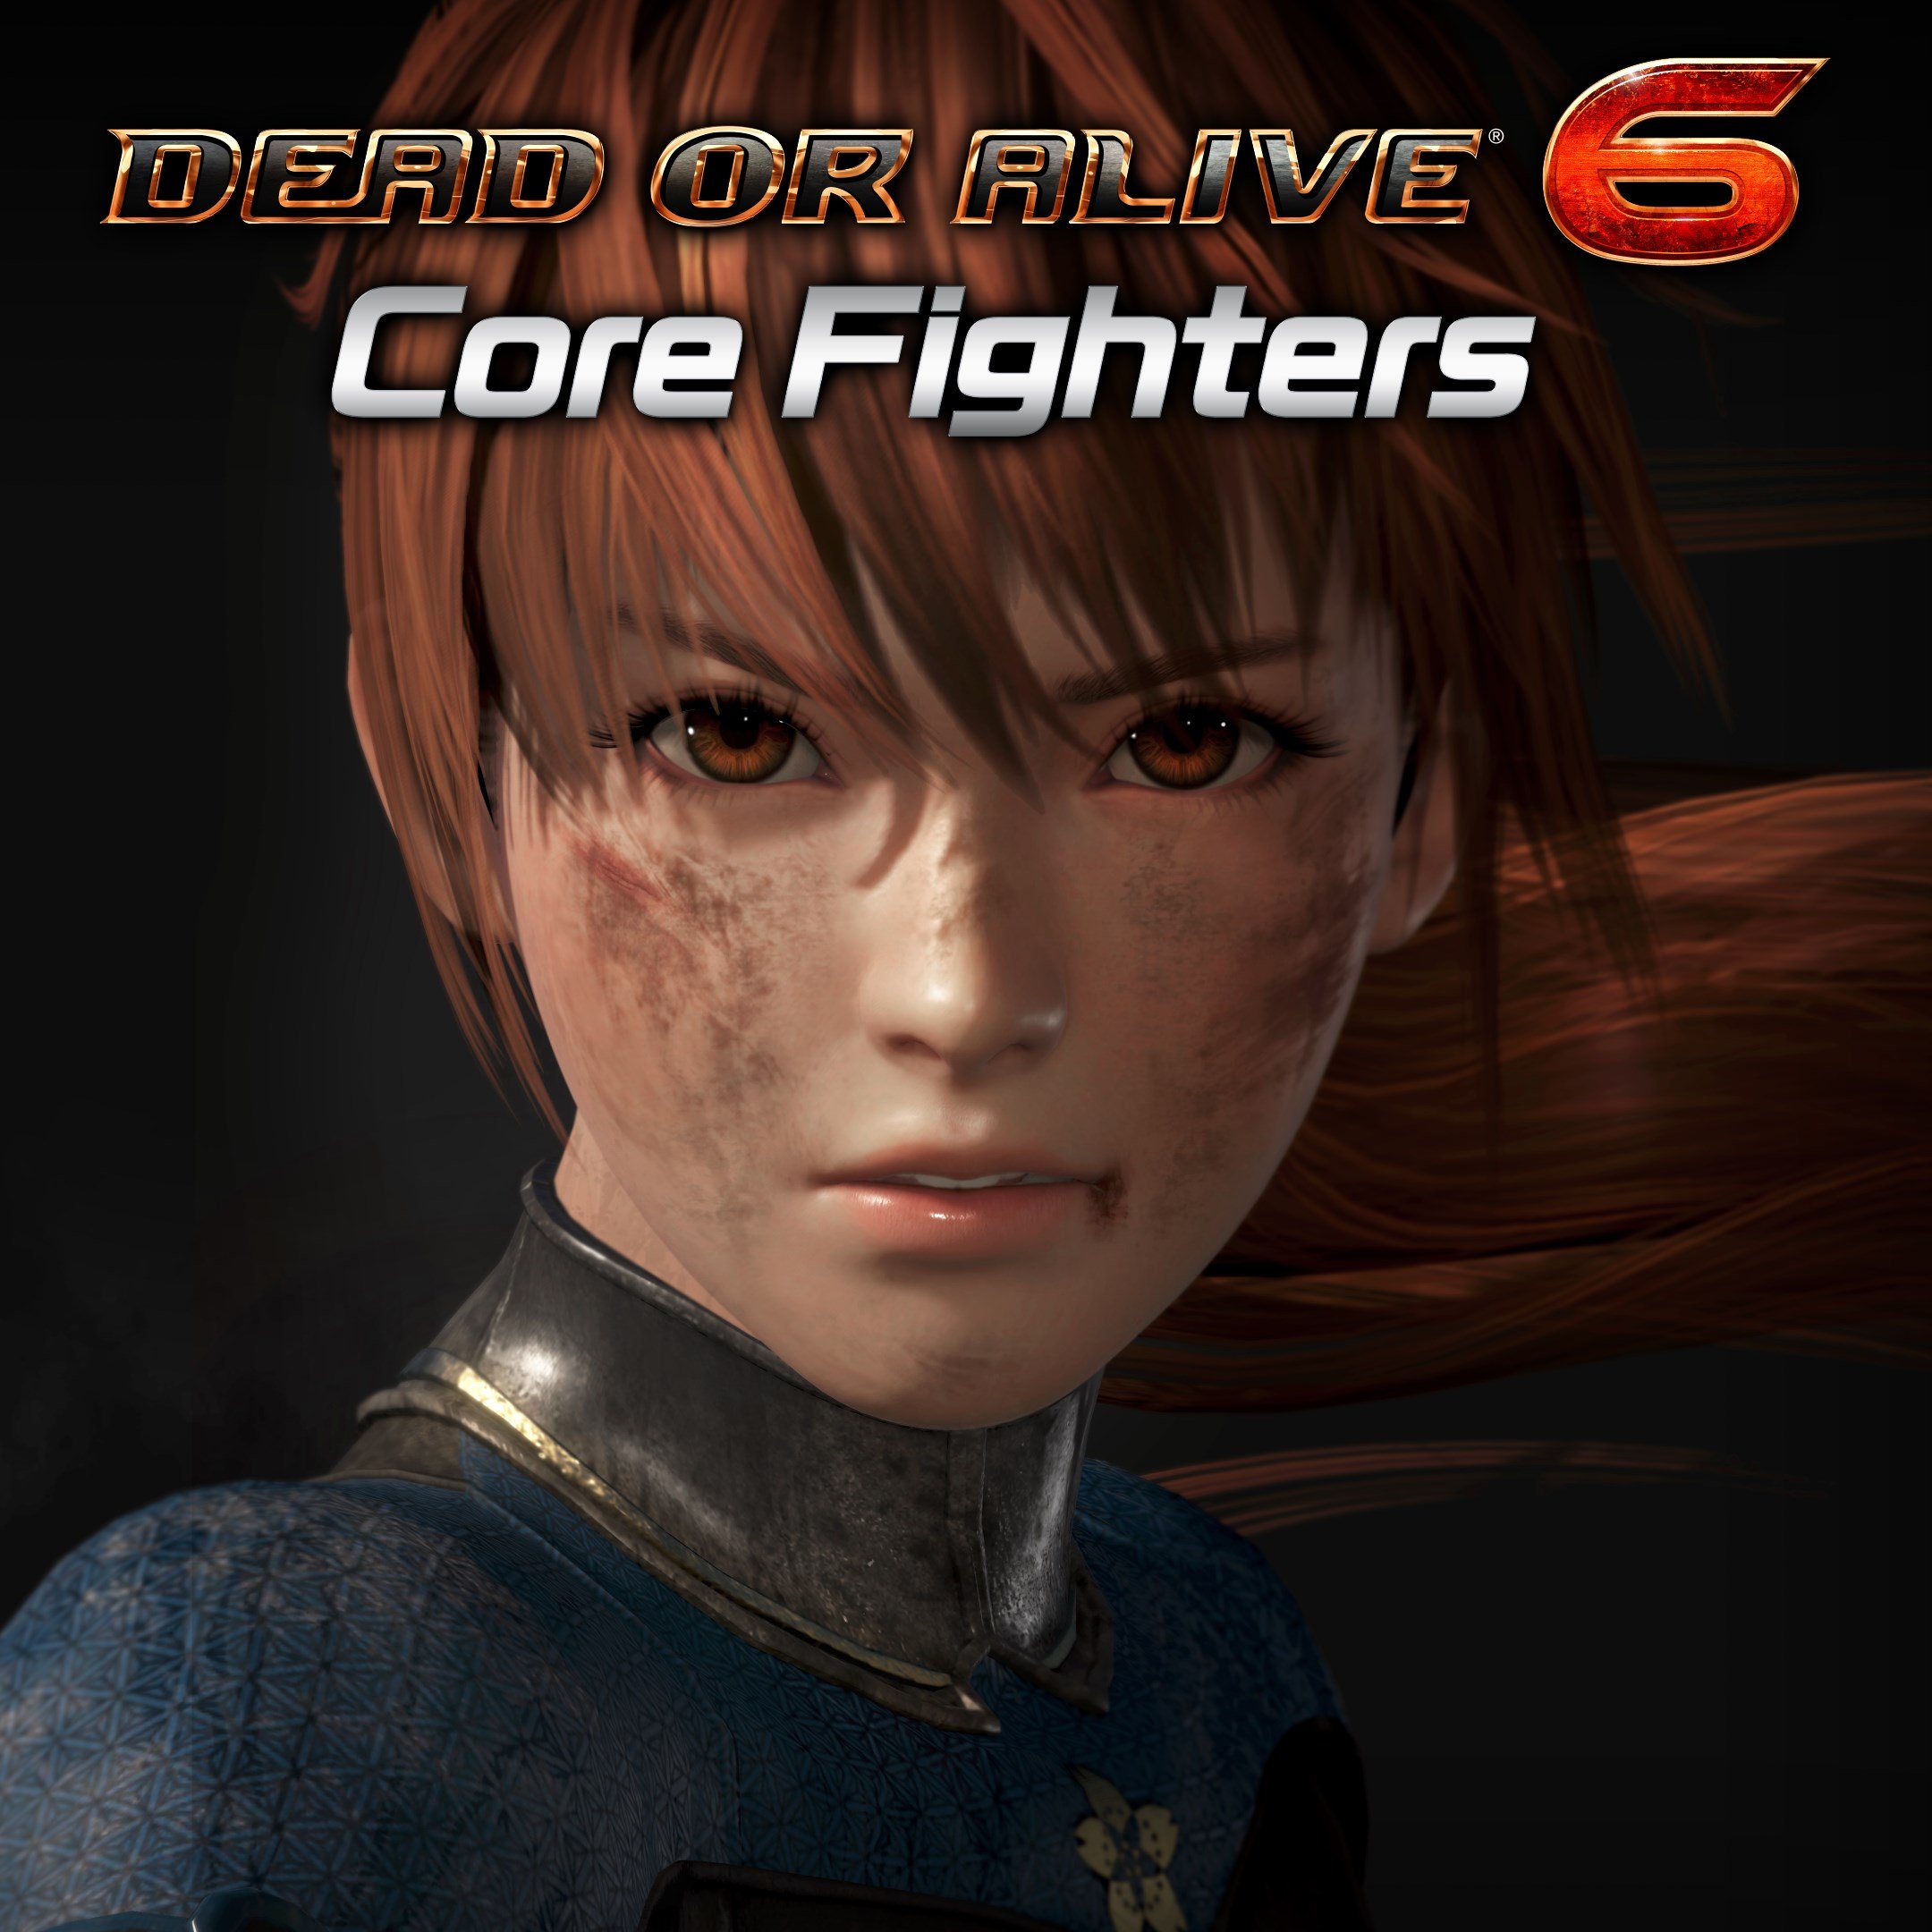 Boxart for DEAD OR ALIVE 6